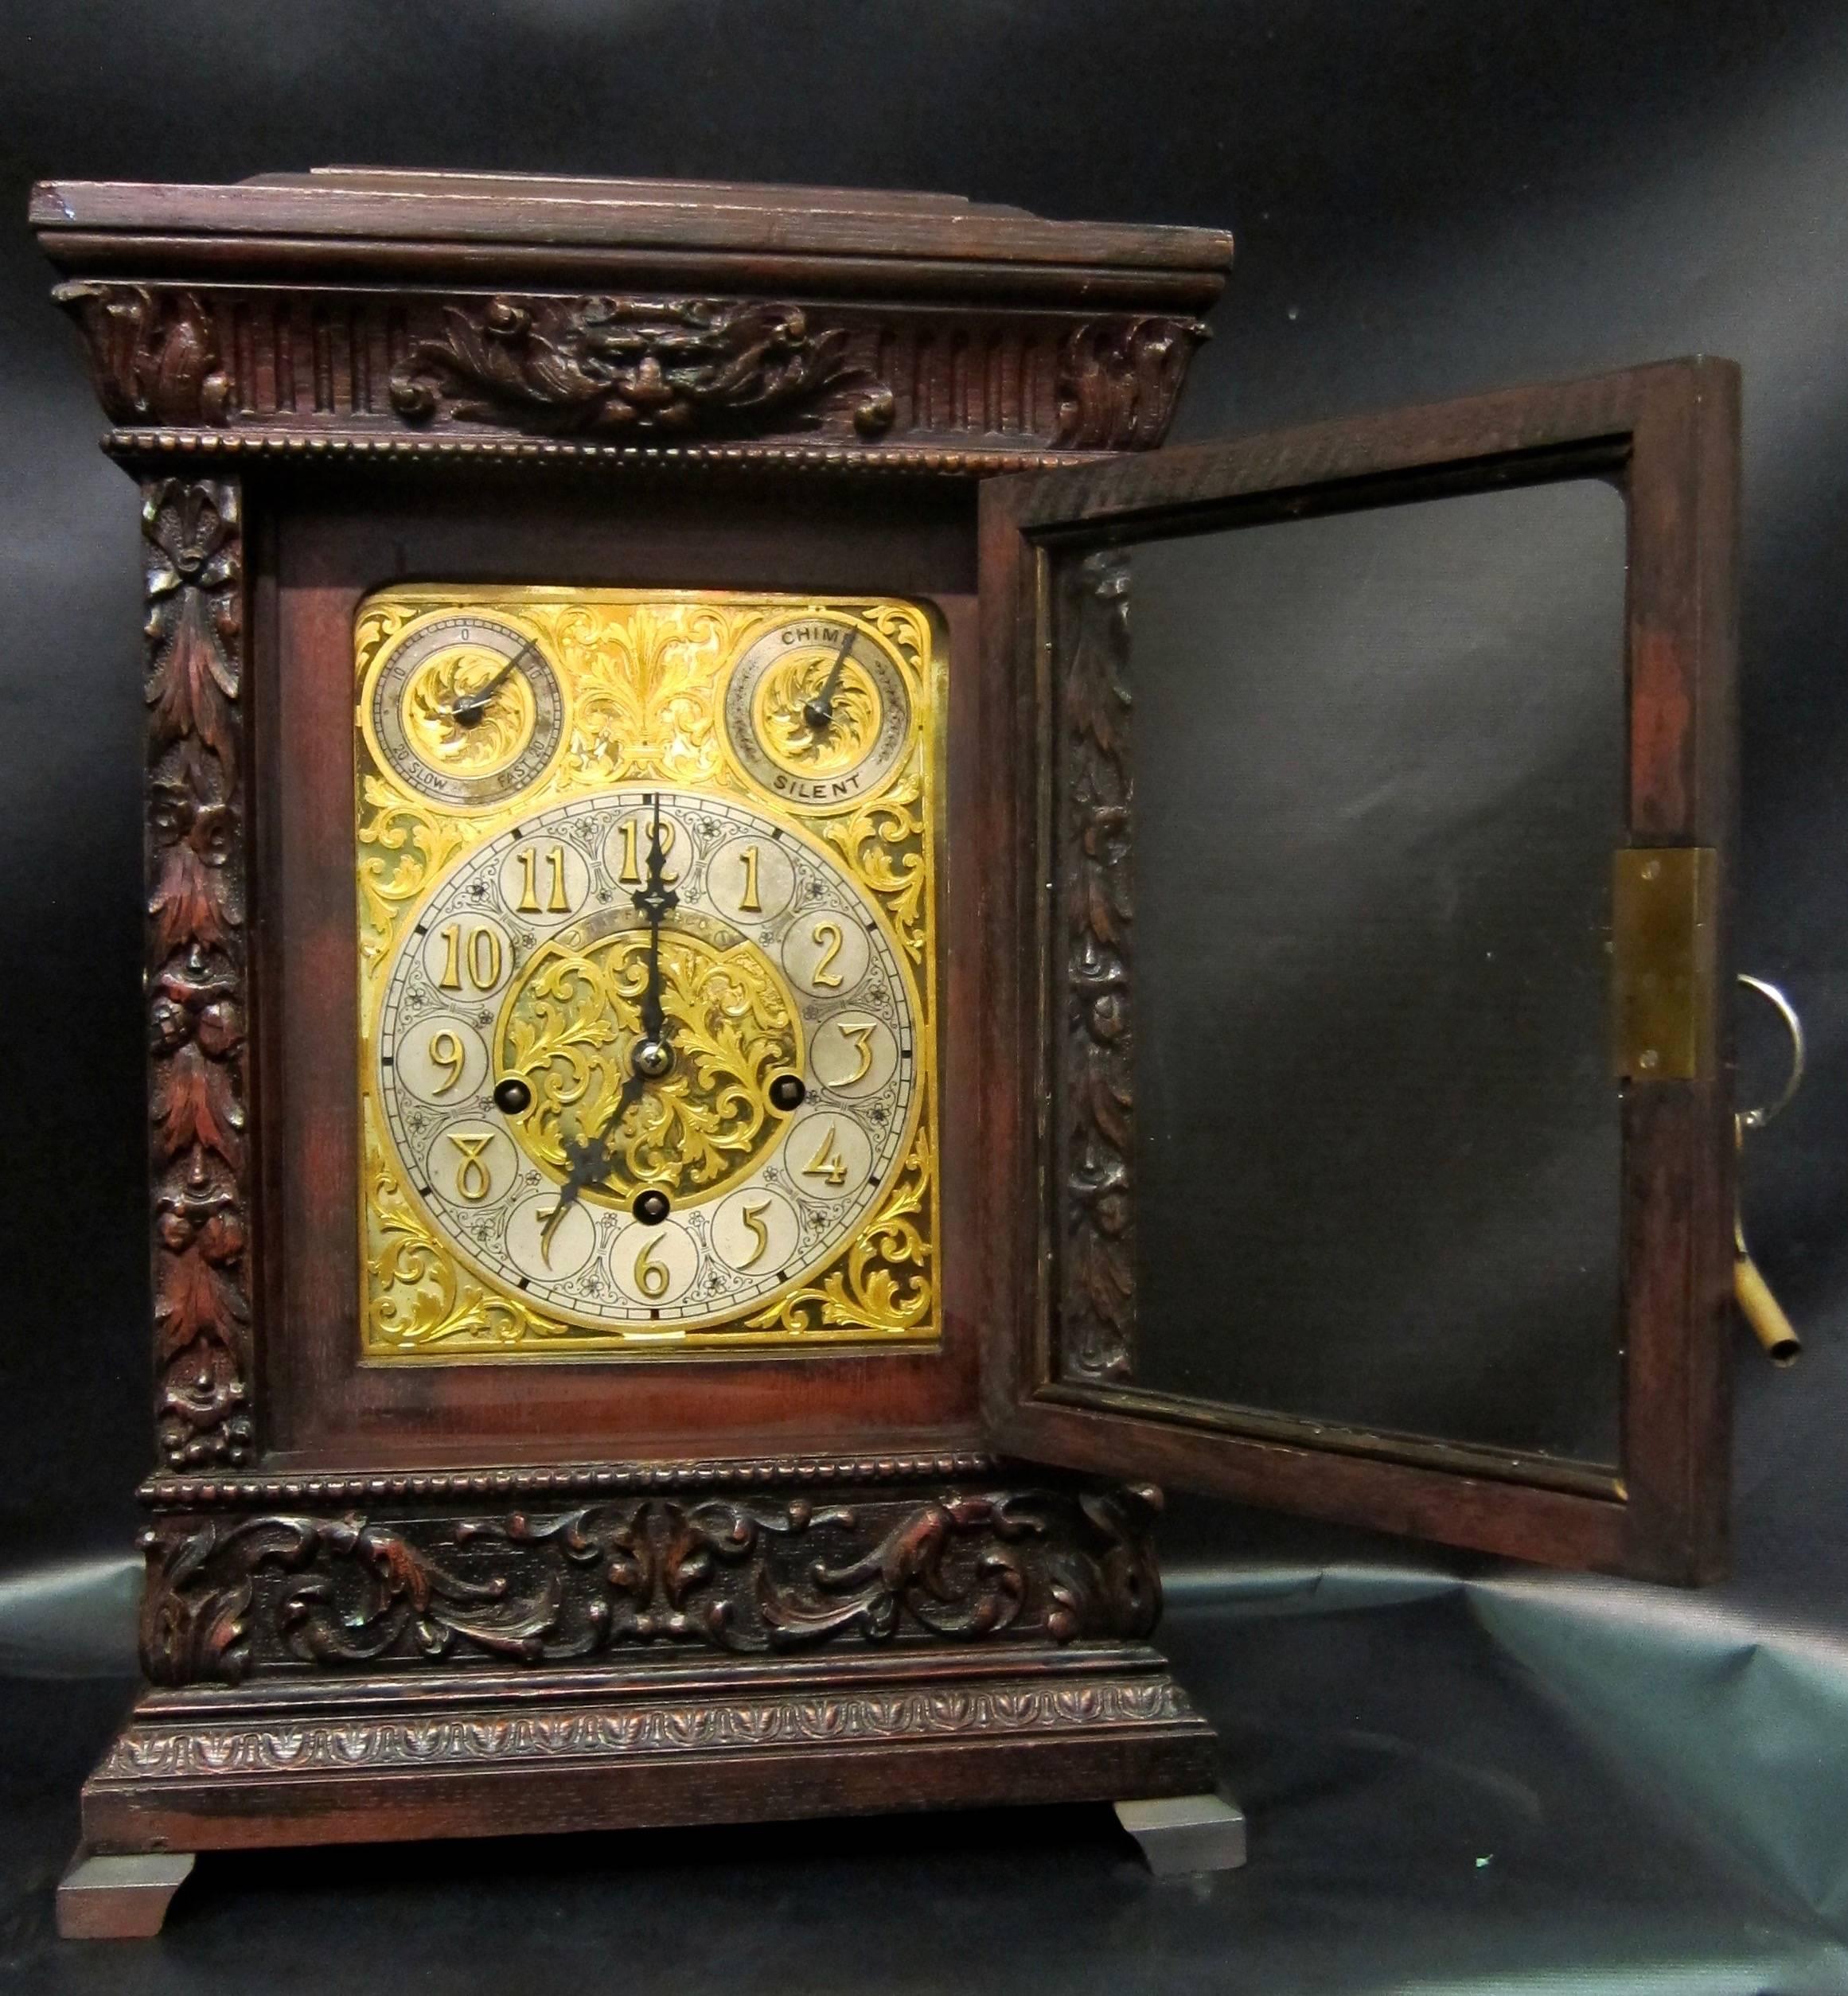 This early 20th century Tiffany & Co. mantel clock is designed in a decorative solid dark oak case. This clock case has beautifully carved accents, including one of the North wind diety above the front door. Behind this key lock hinged glass door,